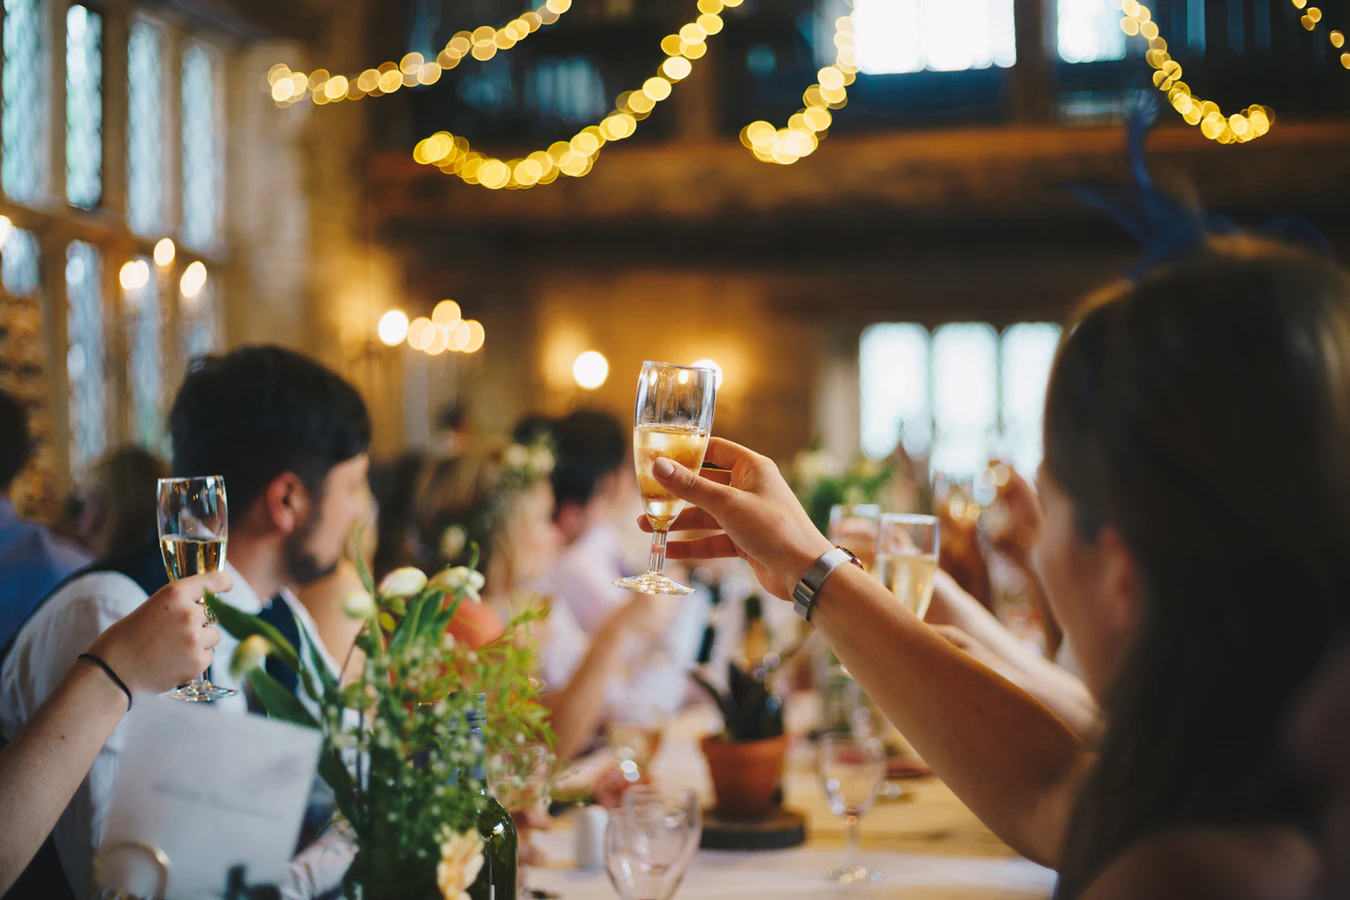 Guests raise their glasses at a wedding reception